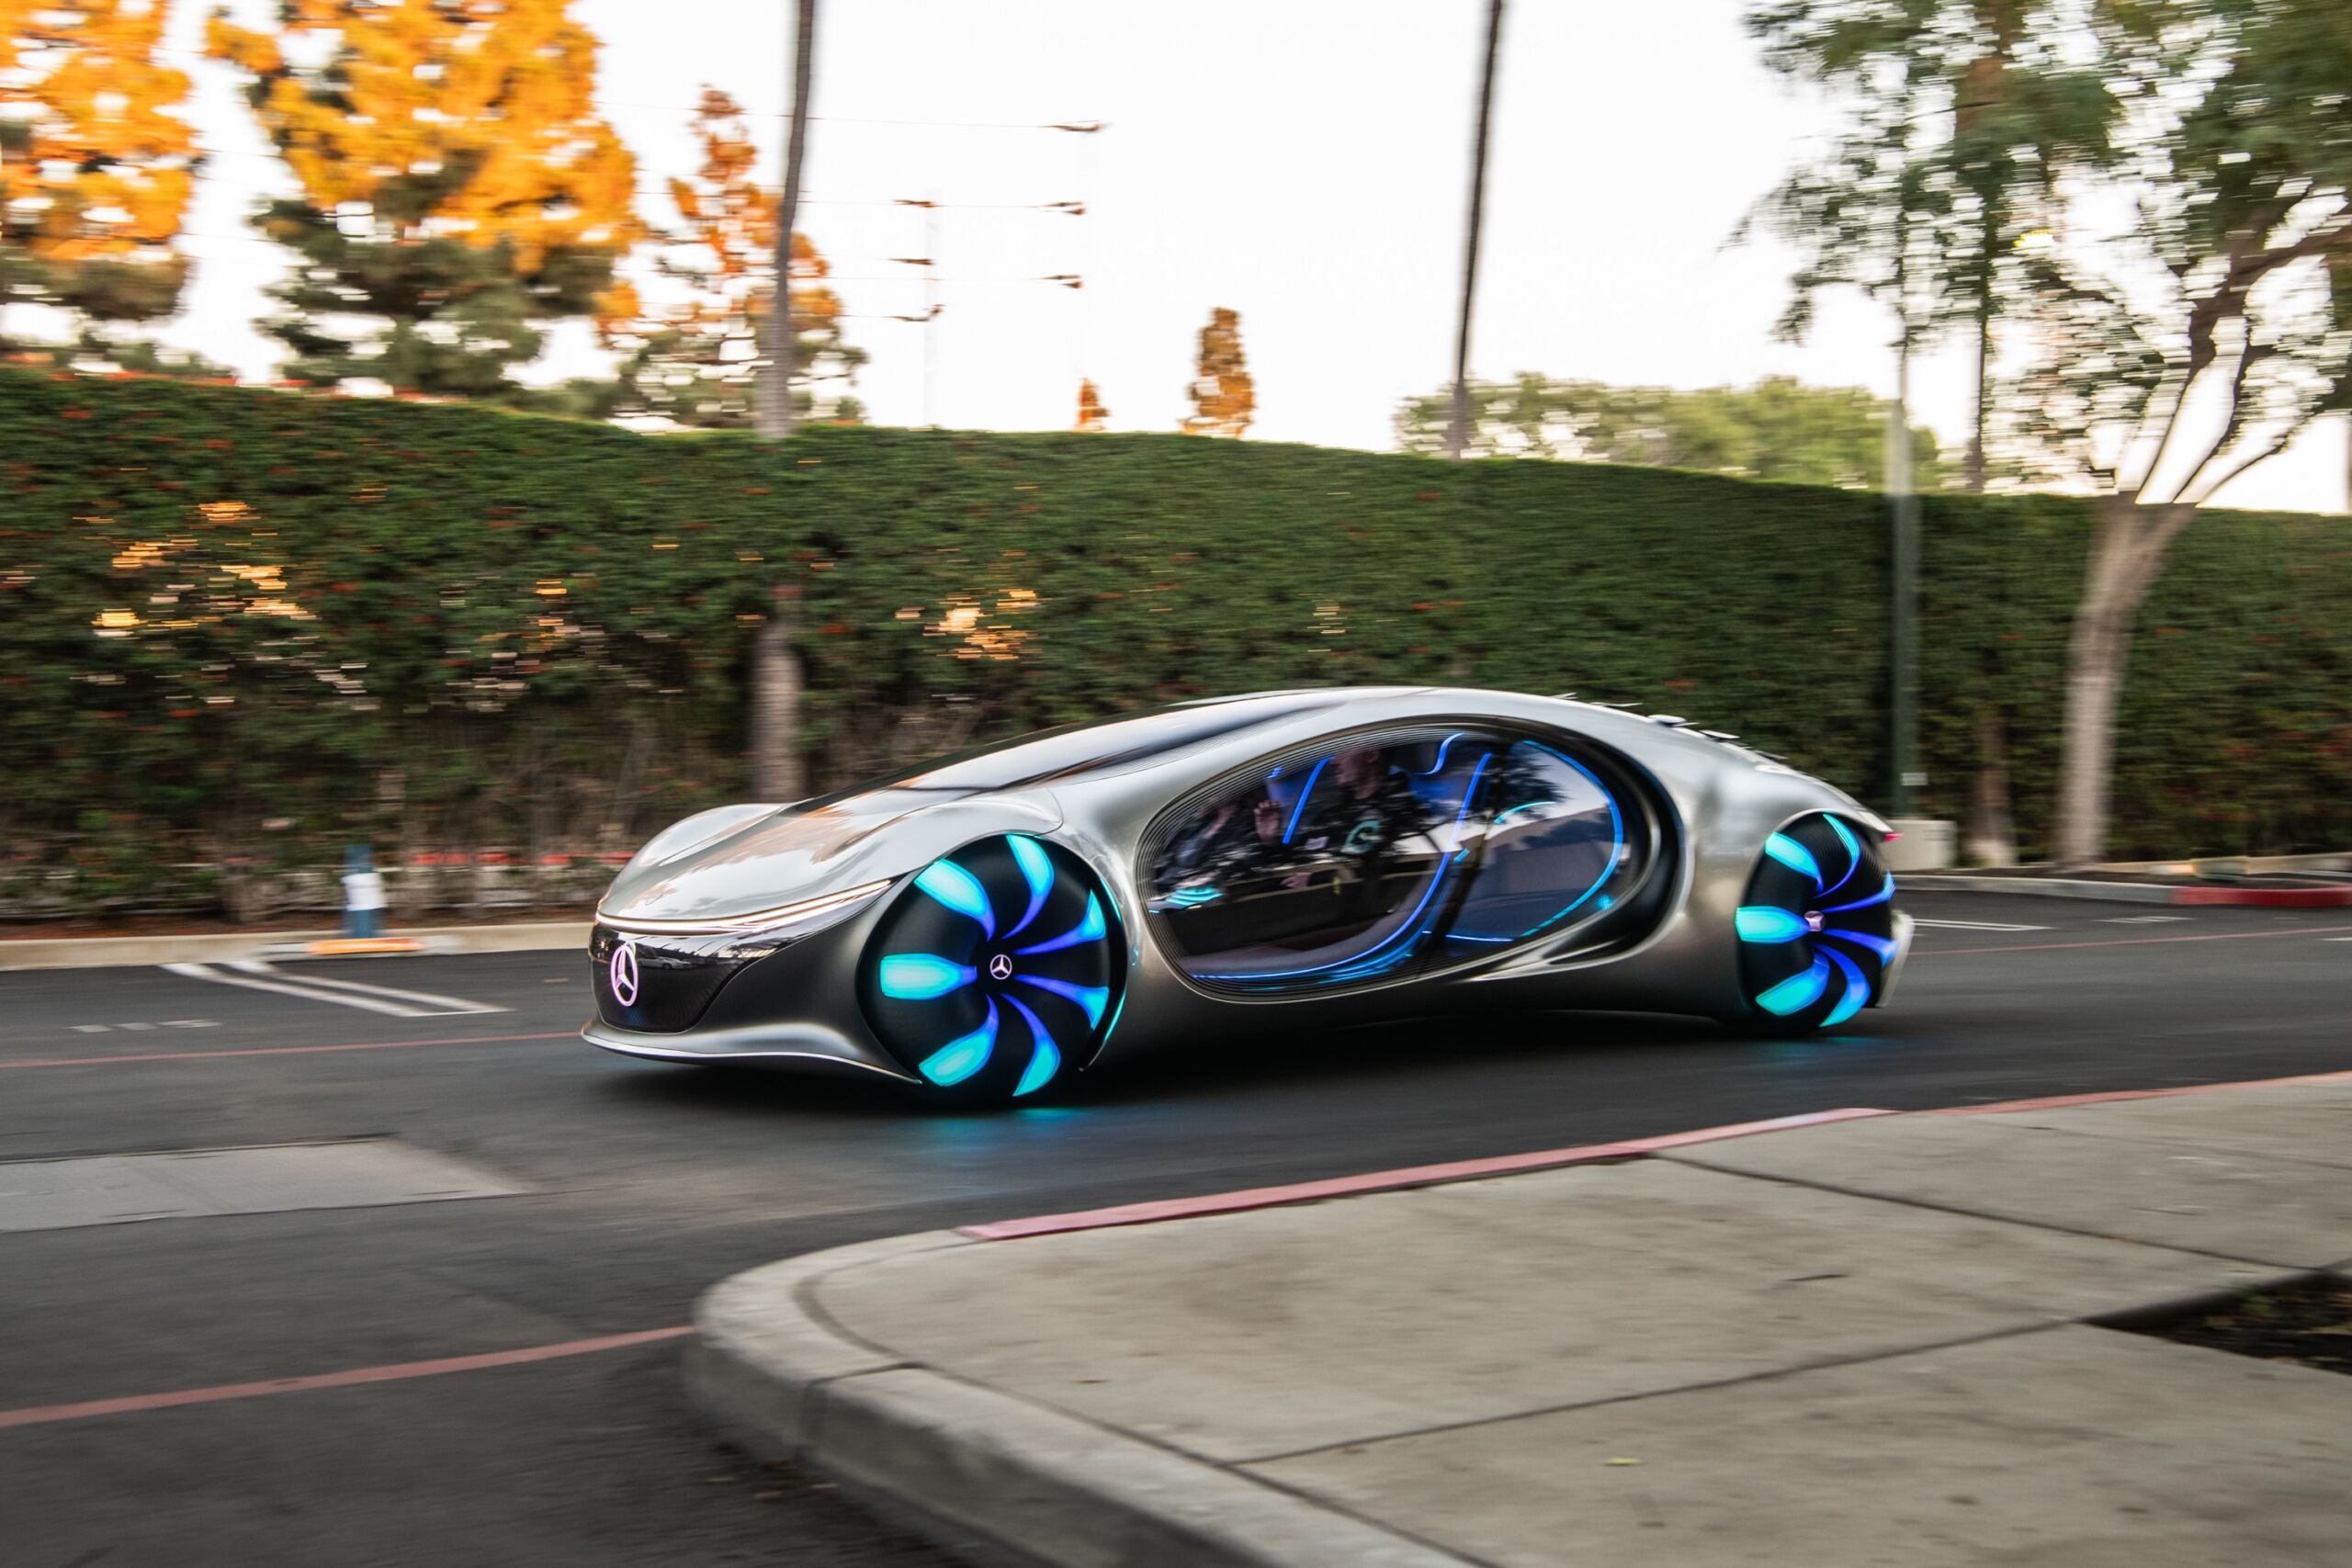 Mercedes built a concept car for Avatar, and we drove it